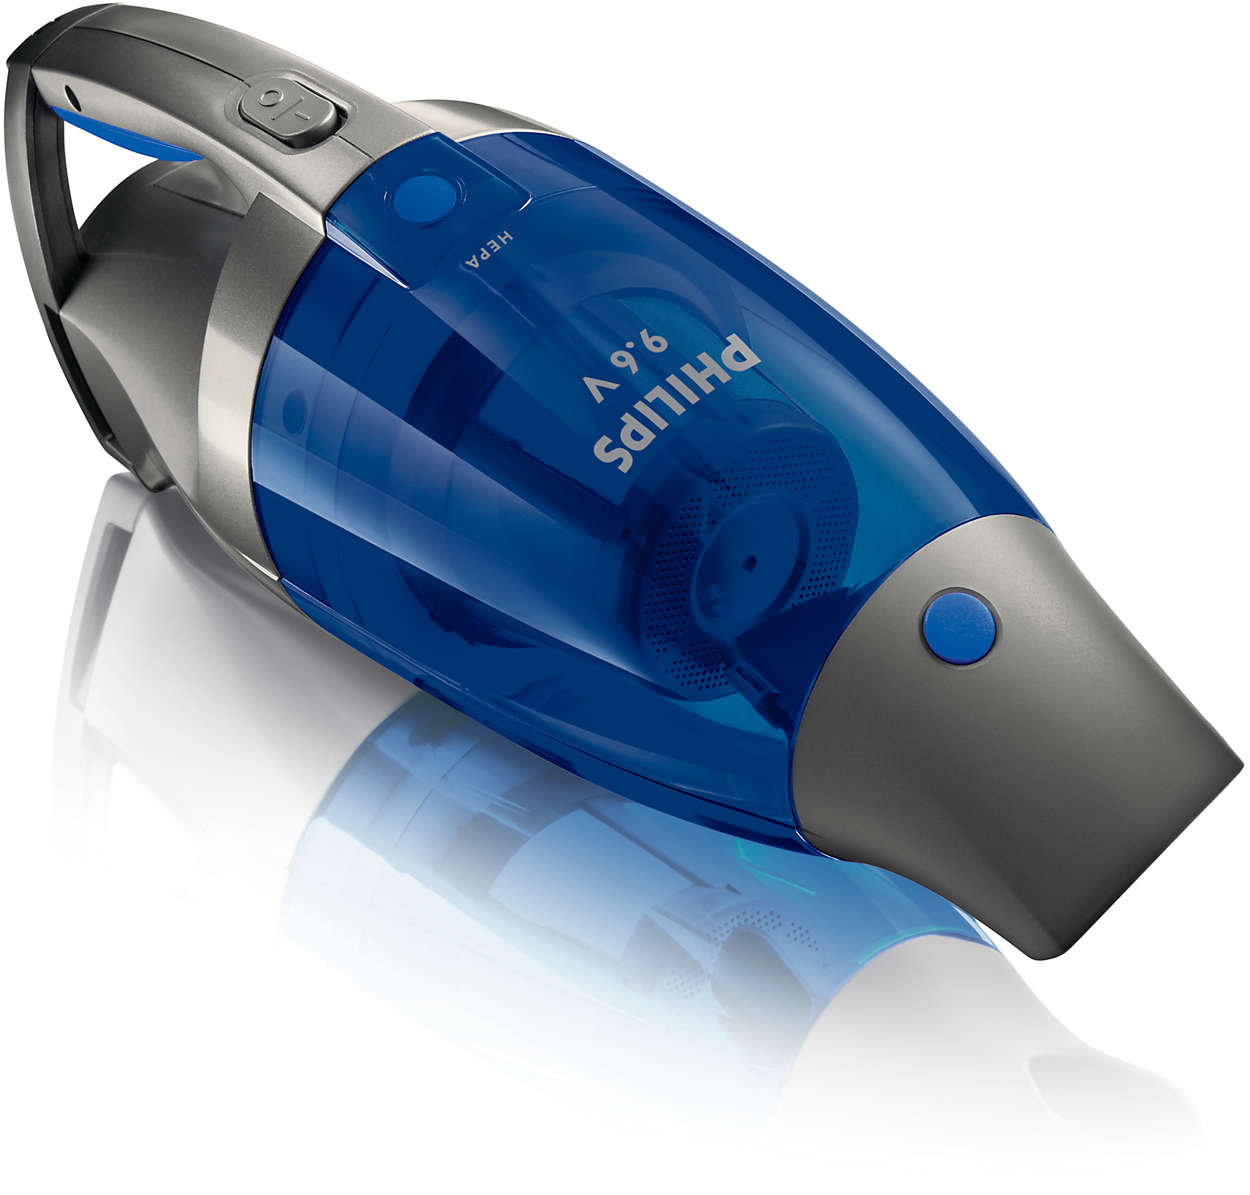 The first anti-allergy Mini Vac by Philips